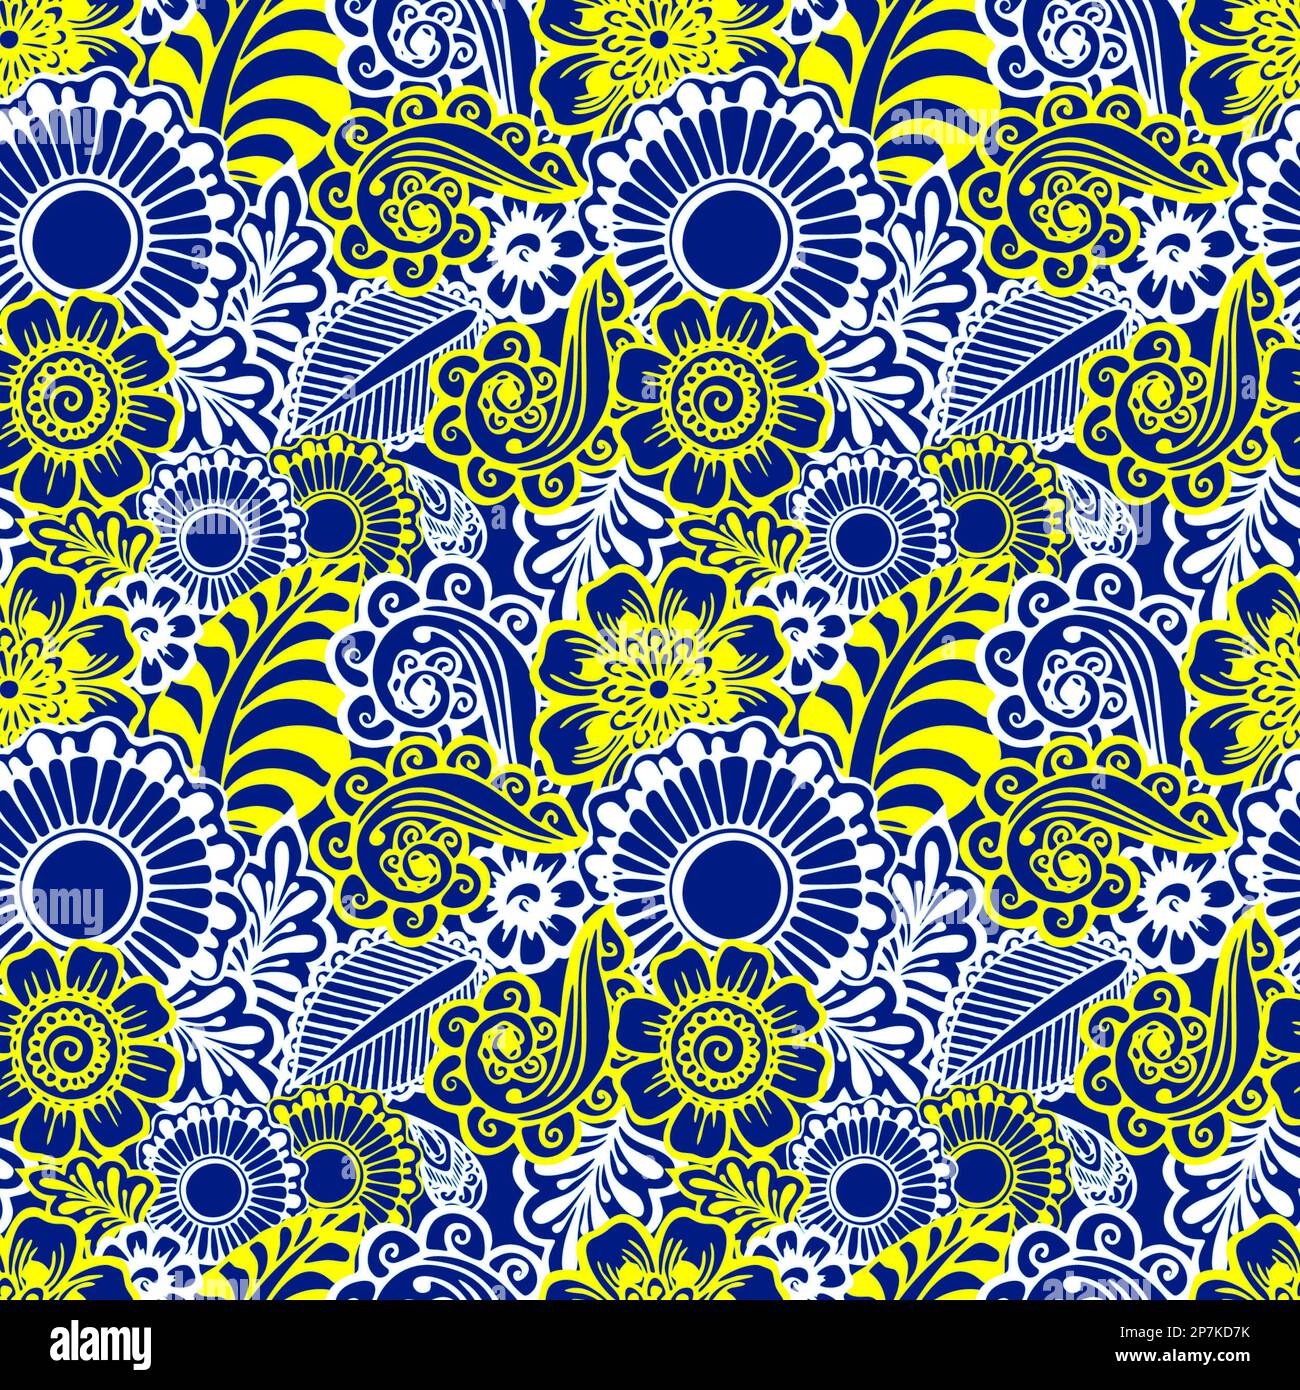 seamless floral graphic pattern of white and yellow elements on a blue background, texture, design Stock Photo